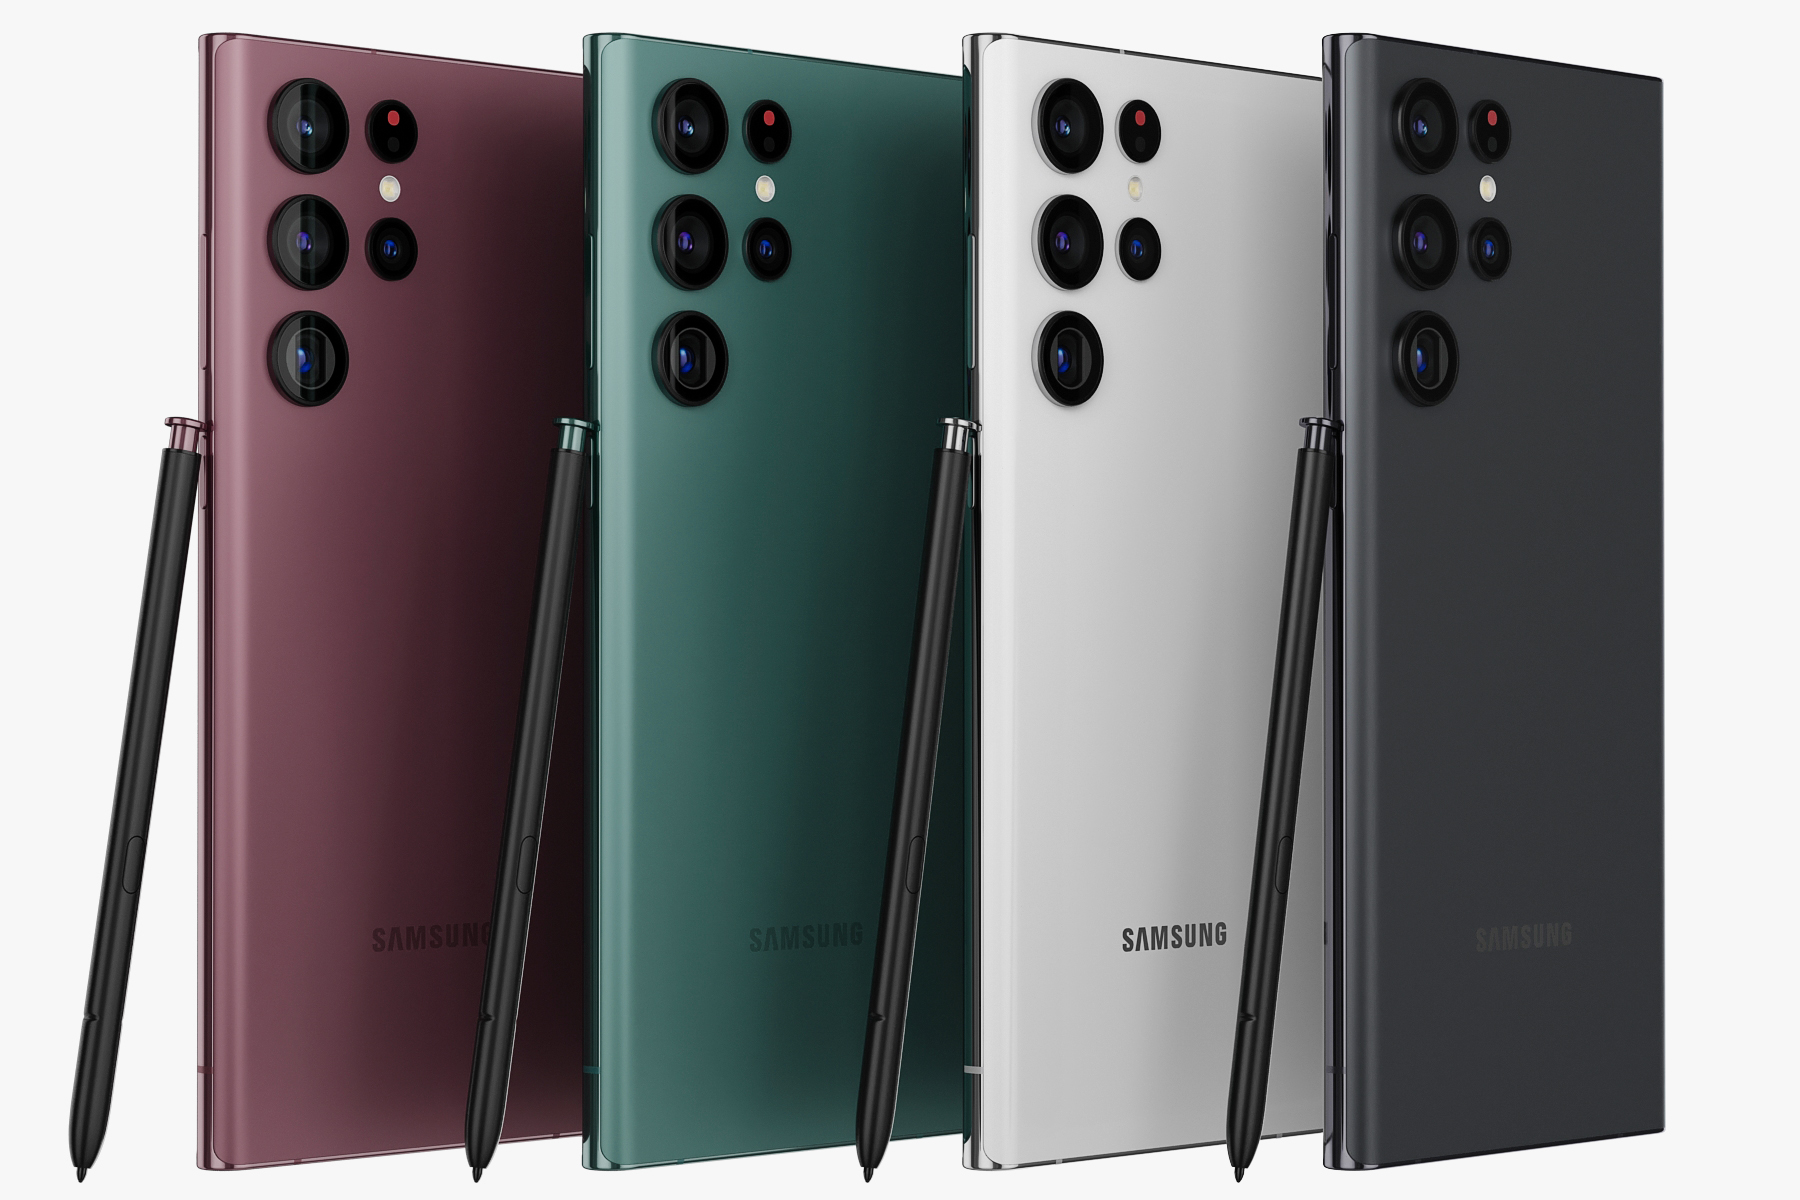 Samsung Galaxy S22 Ultra all colors